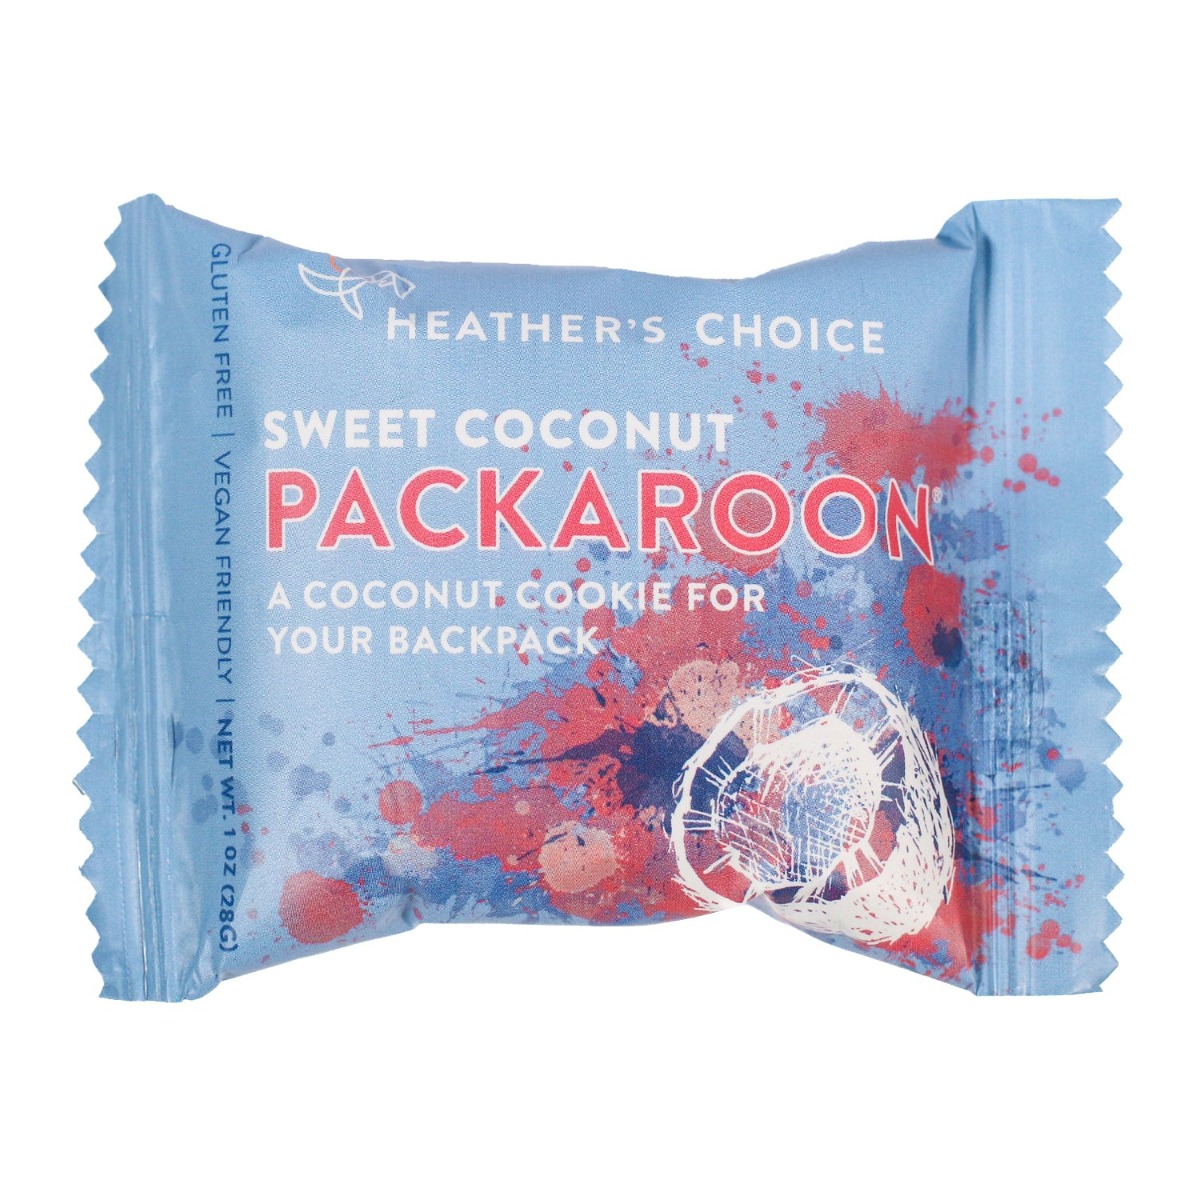 Sweet Coconut Packaroons(R) - Single Pack (Heather's Choice)